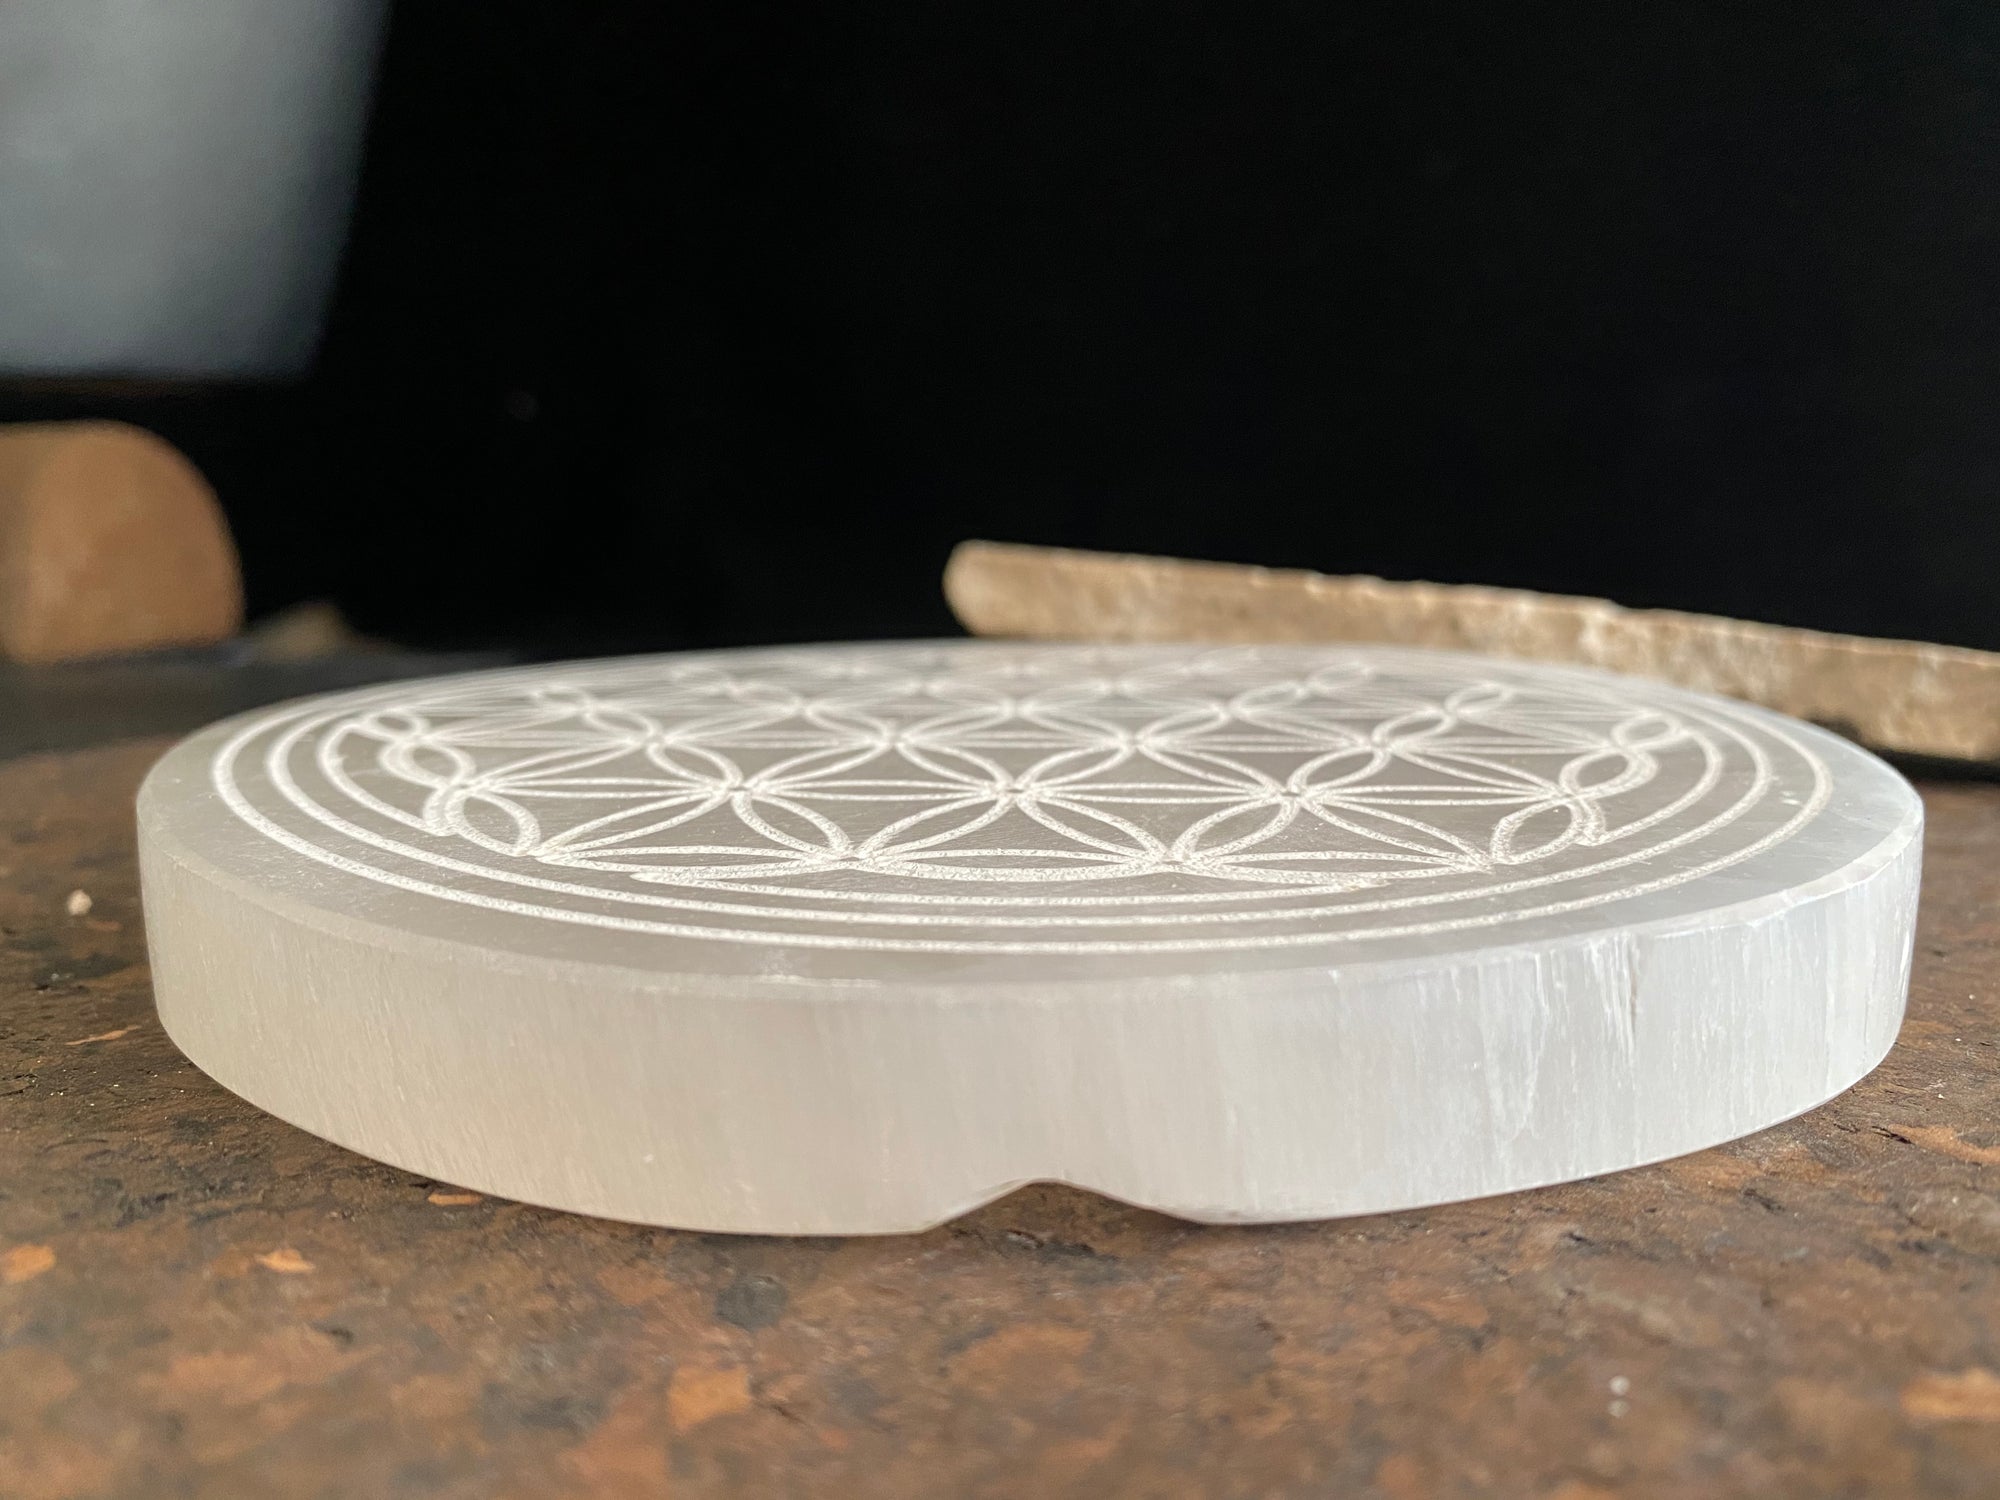 Large, engraved selenite charging plate or stand for the display of crystals and other important objects. Diameter 14.8 cm